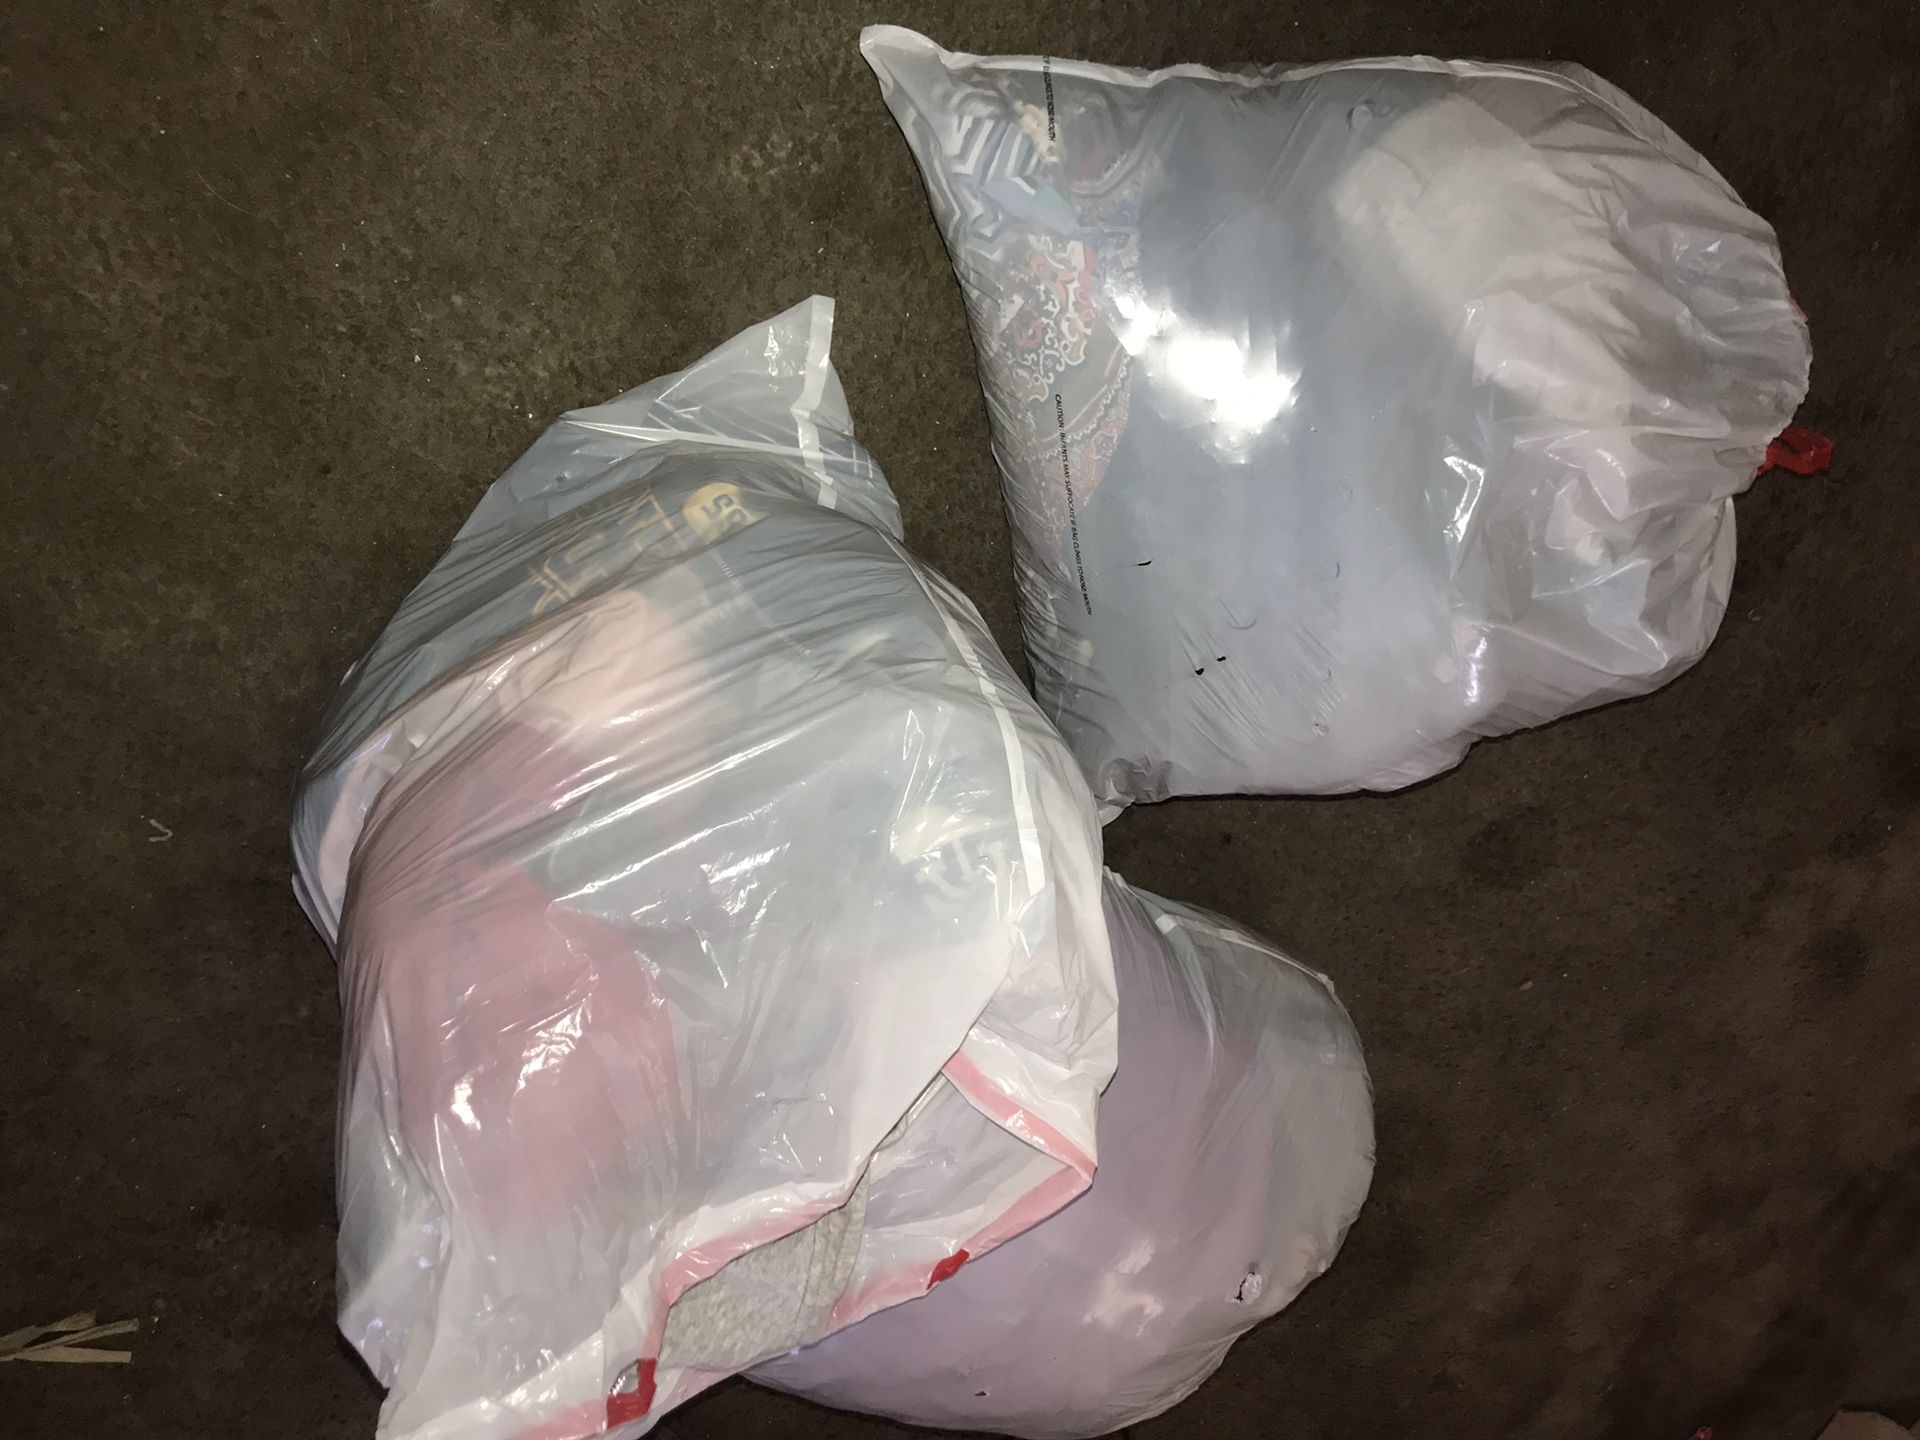 3 Full Bags of Women’s Clothes